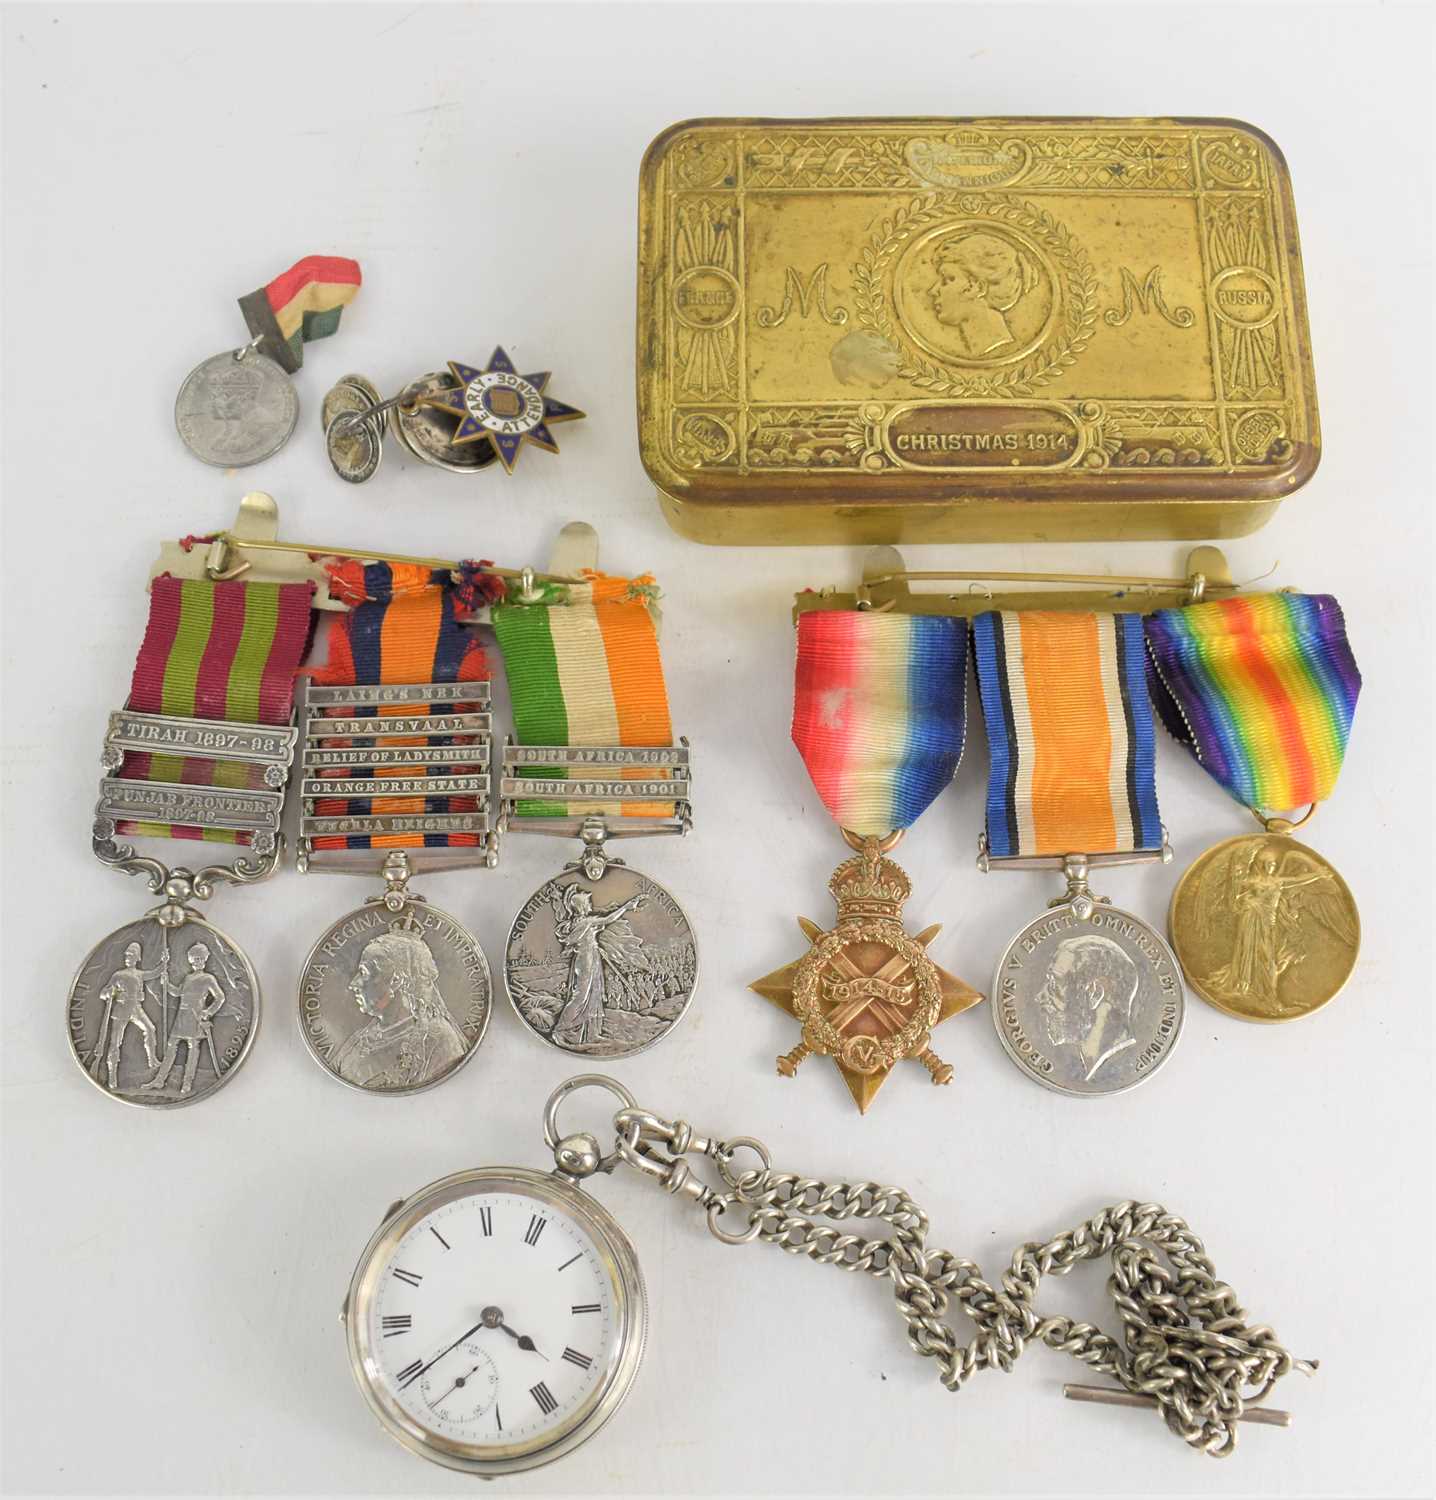 An extensive collection of medals awarded to C. Goodyer, likely Charles Goodyer service number